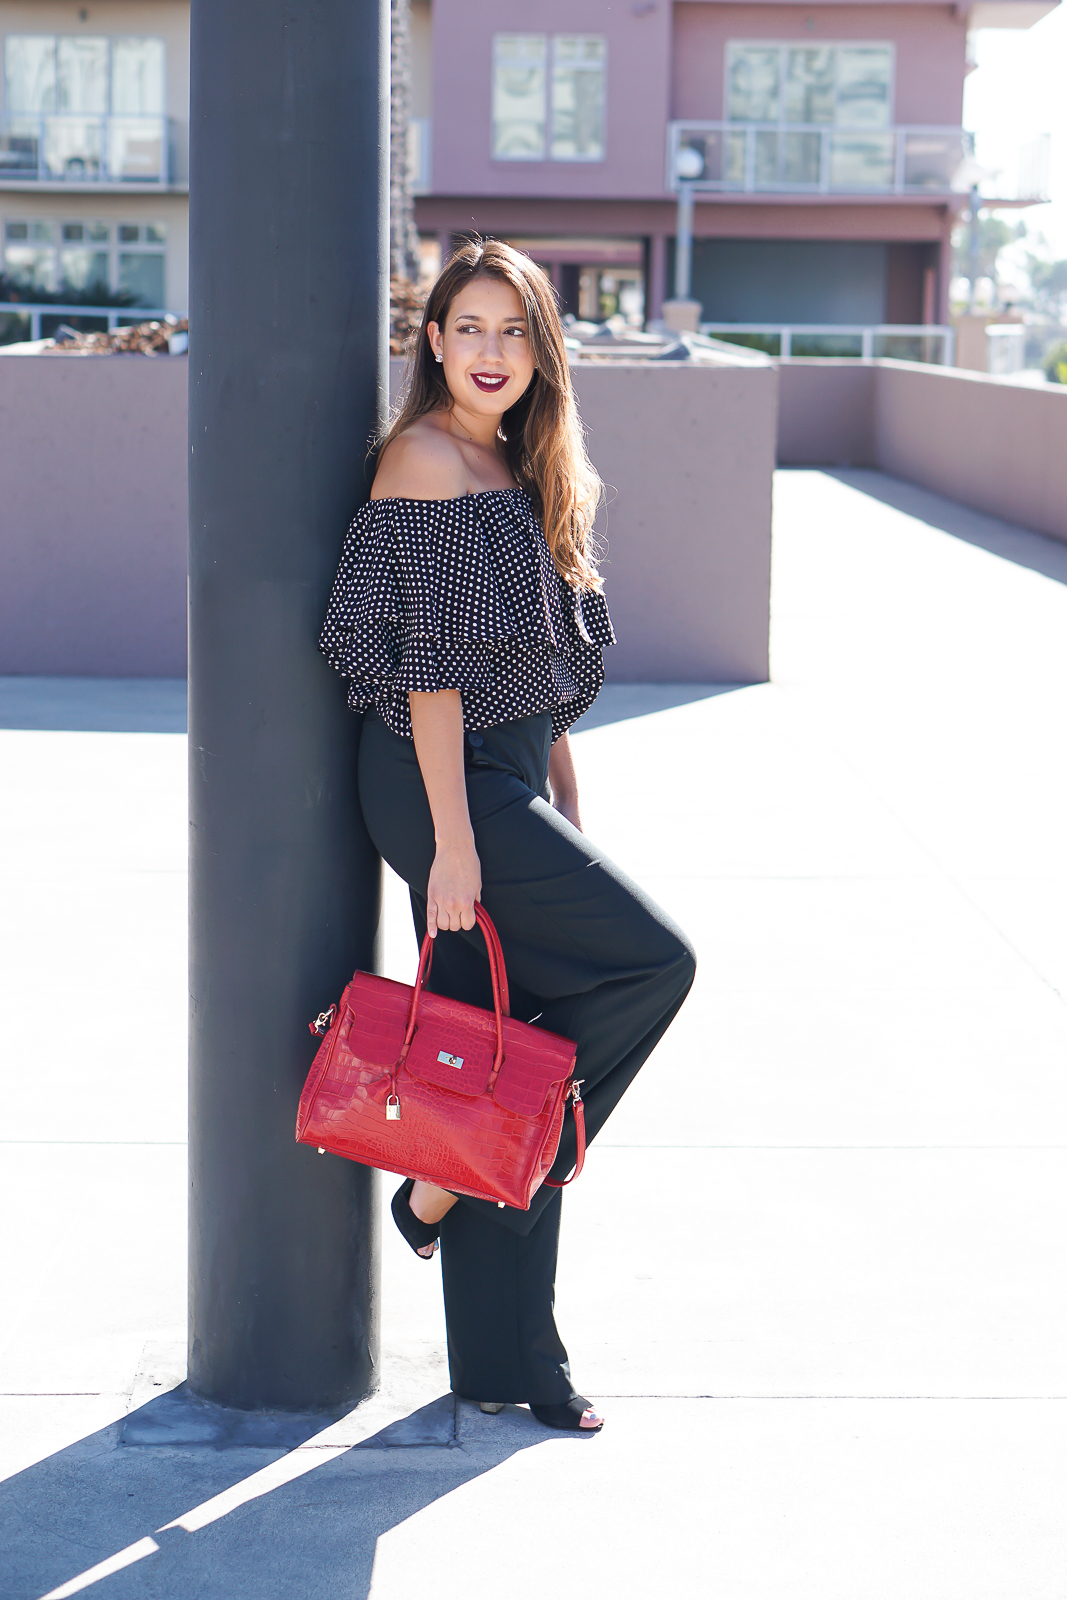 Fashion, SheIn Black Polka Dot Ruffle Off The Shoulder Blouse, How to wear off the shoulder tops, Women's Sailor Pant - Who What Wear x Target, Red top handle crocodile bag, Shoemint Heels, Diva Mac Red Lipstick, Latina Fashion Blogger, LA Fashion Blogger, Long Beach Performing Arts Center